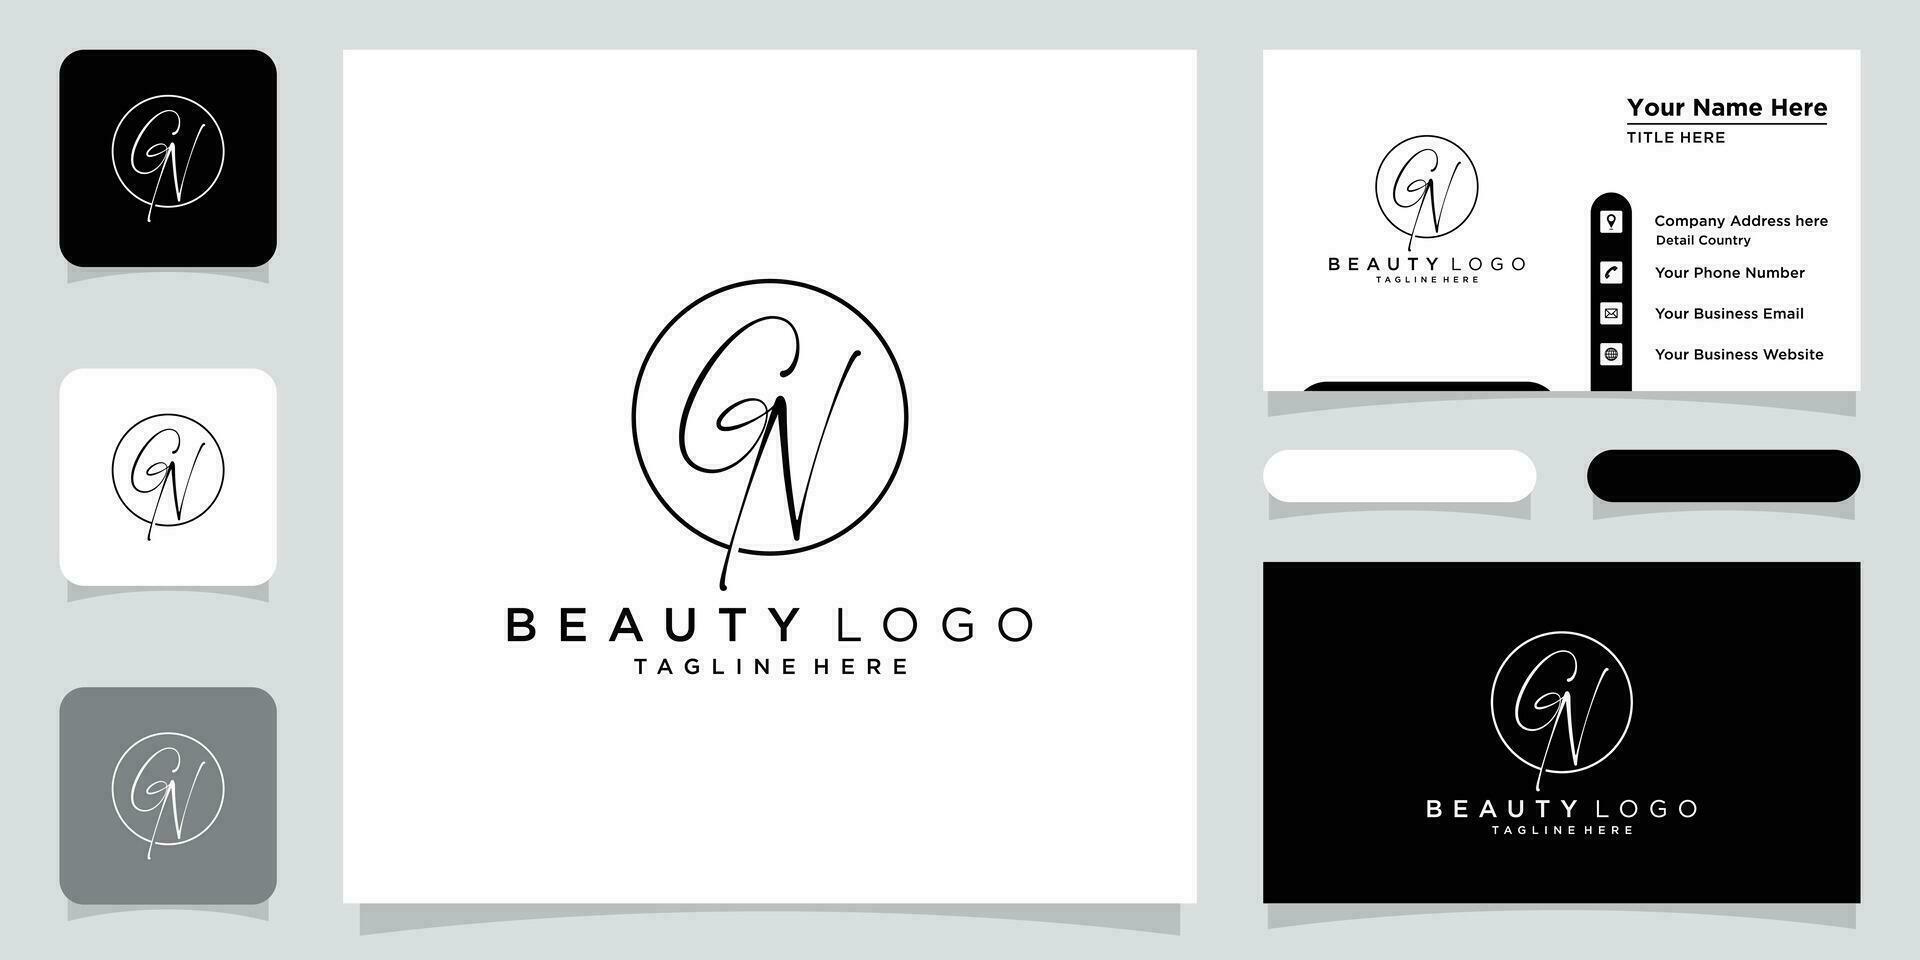 GN Initial handwriting logo vector with business card design Premium Vector